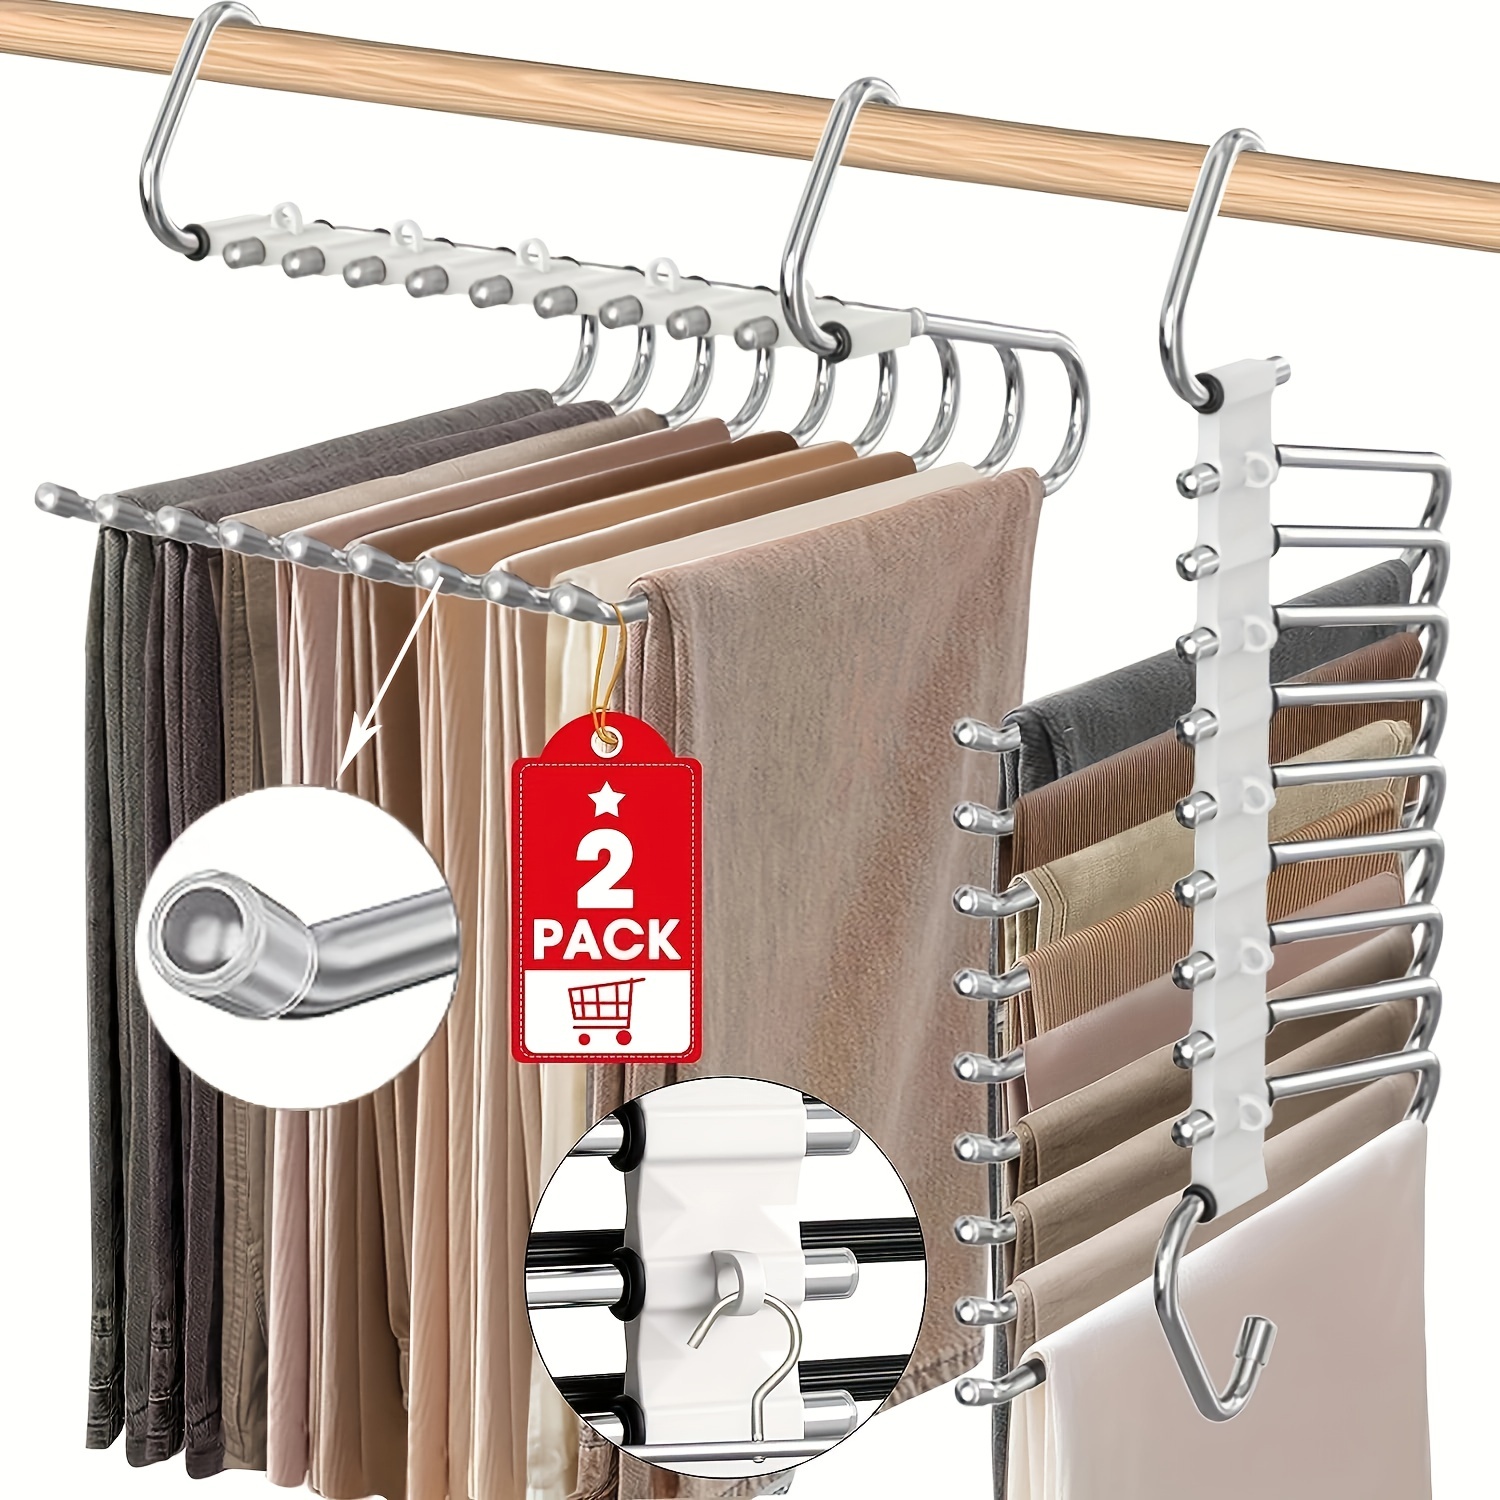 

2pcs 9-tier Non-slip Metal Pants Hanger, Foldable Clothes Rack For Ties, Pants, Scarves, Household Space Saving Organizer For Closet, Wardrobe, Home, Dorm